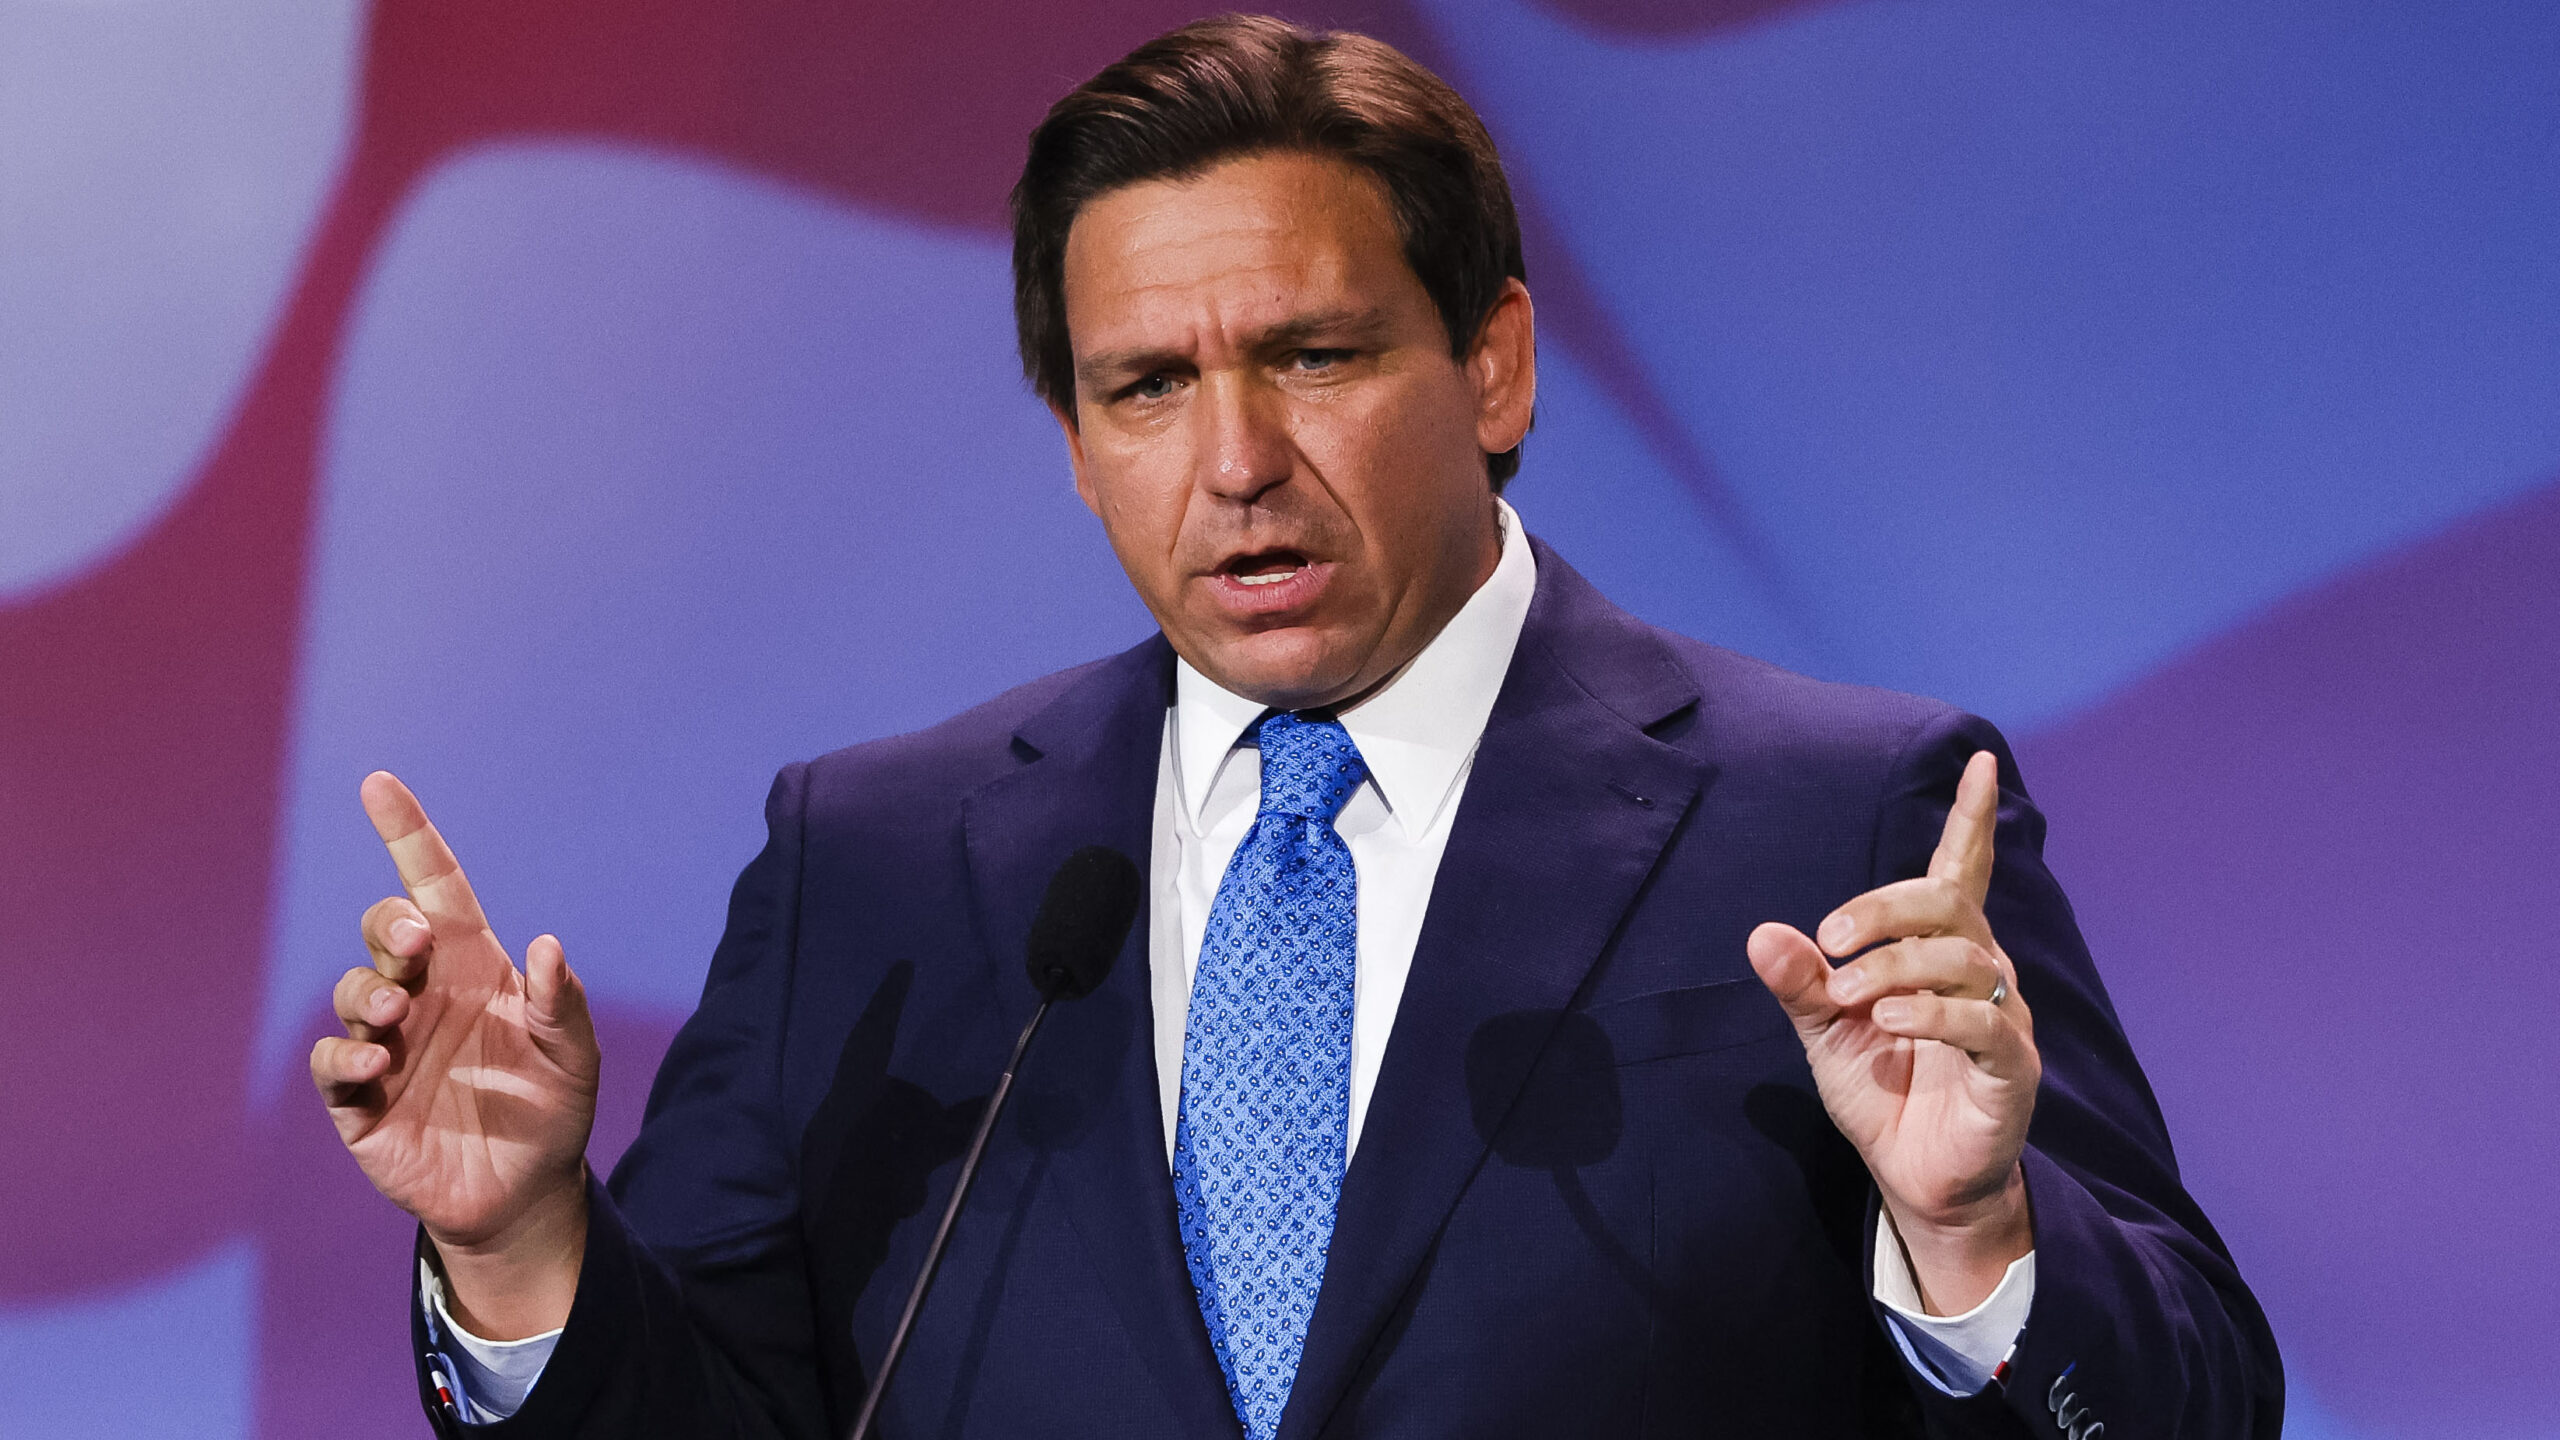 DeSantis Responds To Salacious Reports About Pudding And Force Feeding Detainees At GITMO: ‘Bring It On’